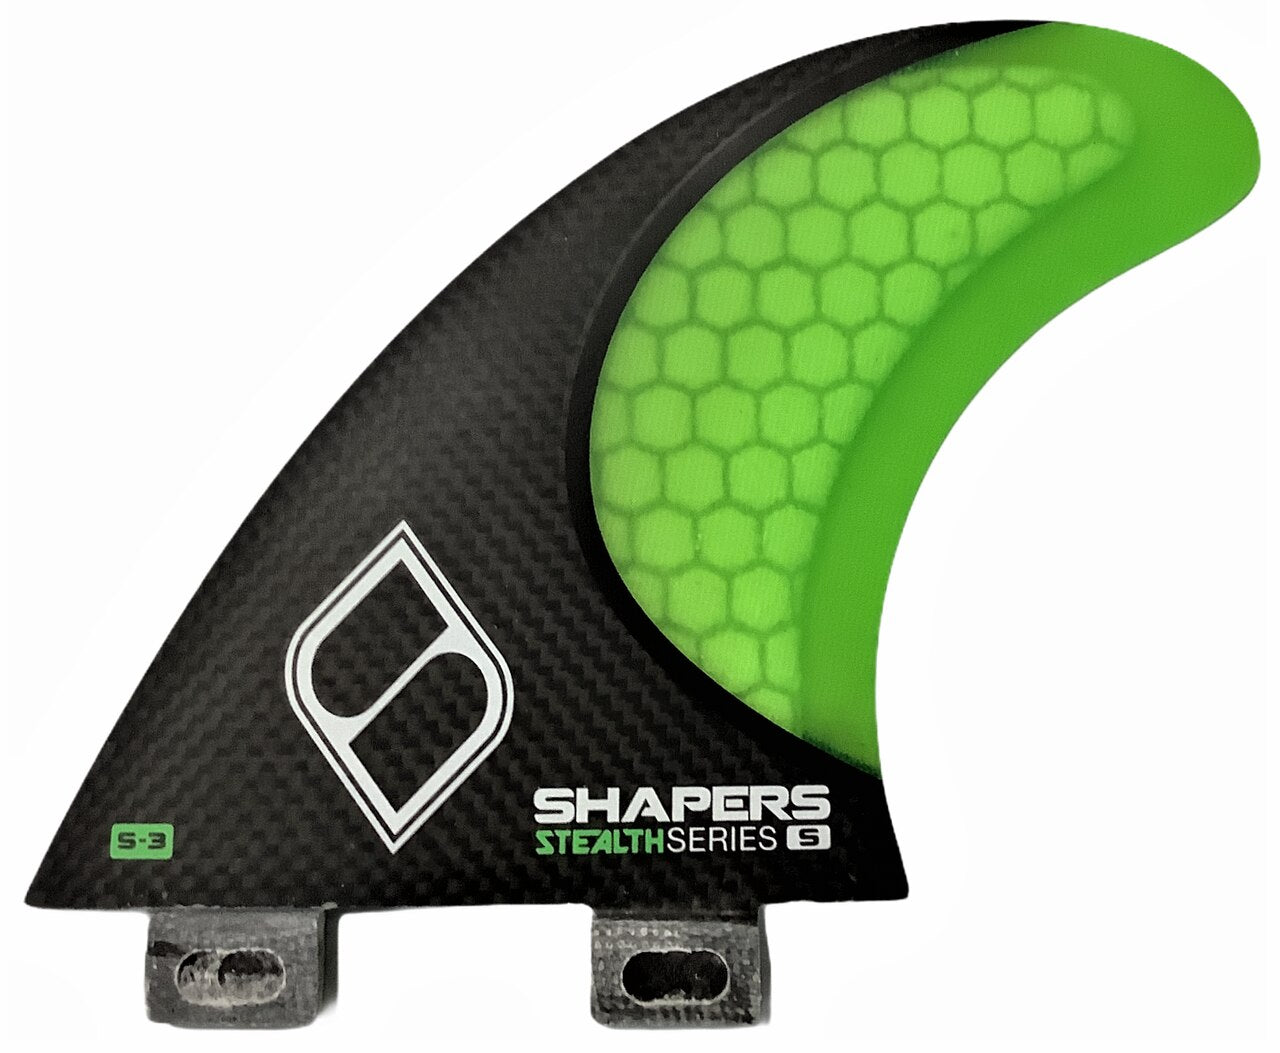 Fins Carbon Stealth Series S3 Model Thruster FCS Small Carbon-Green